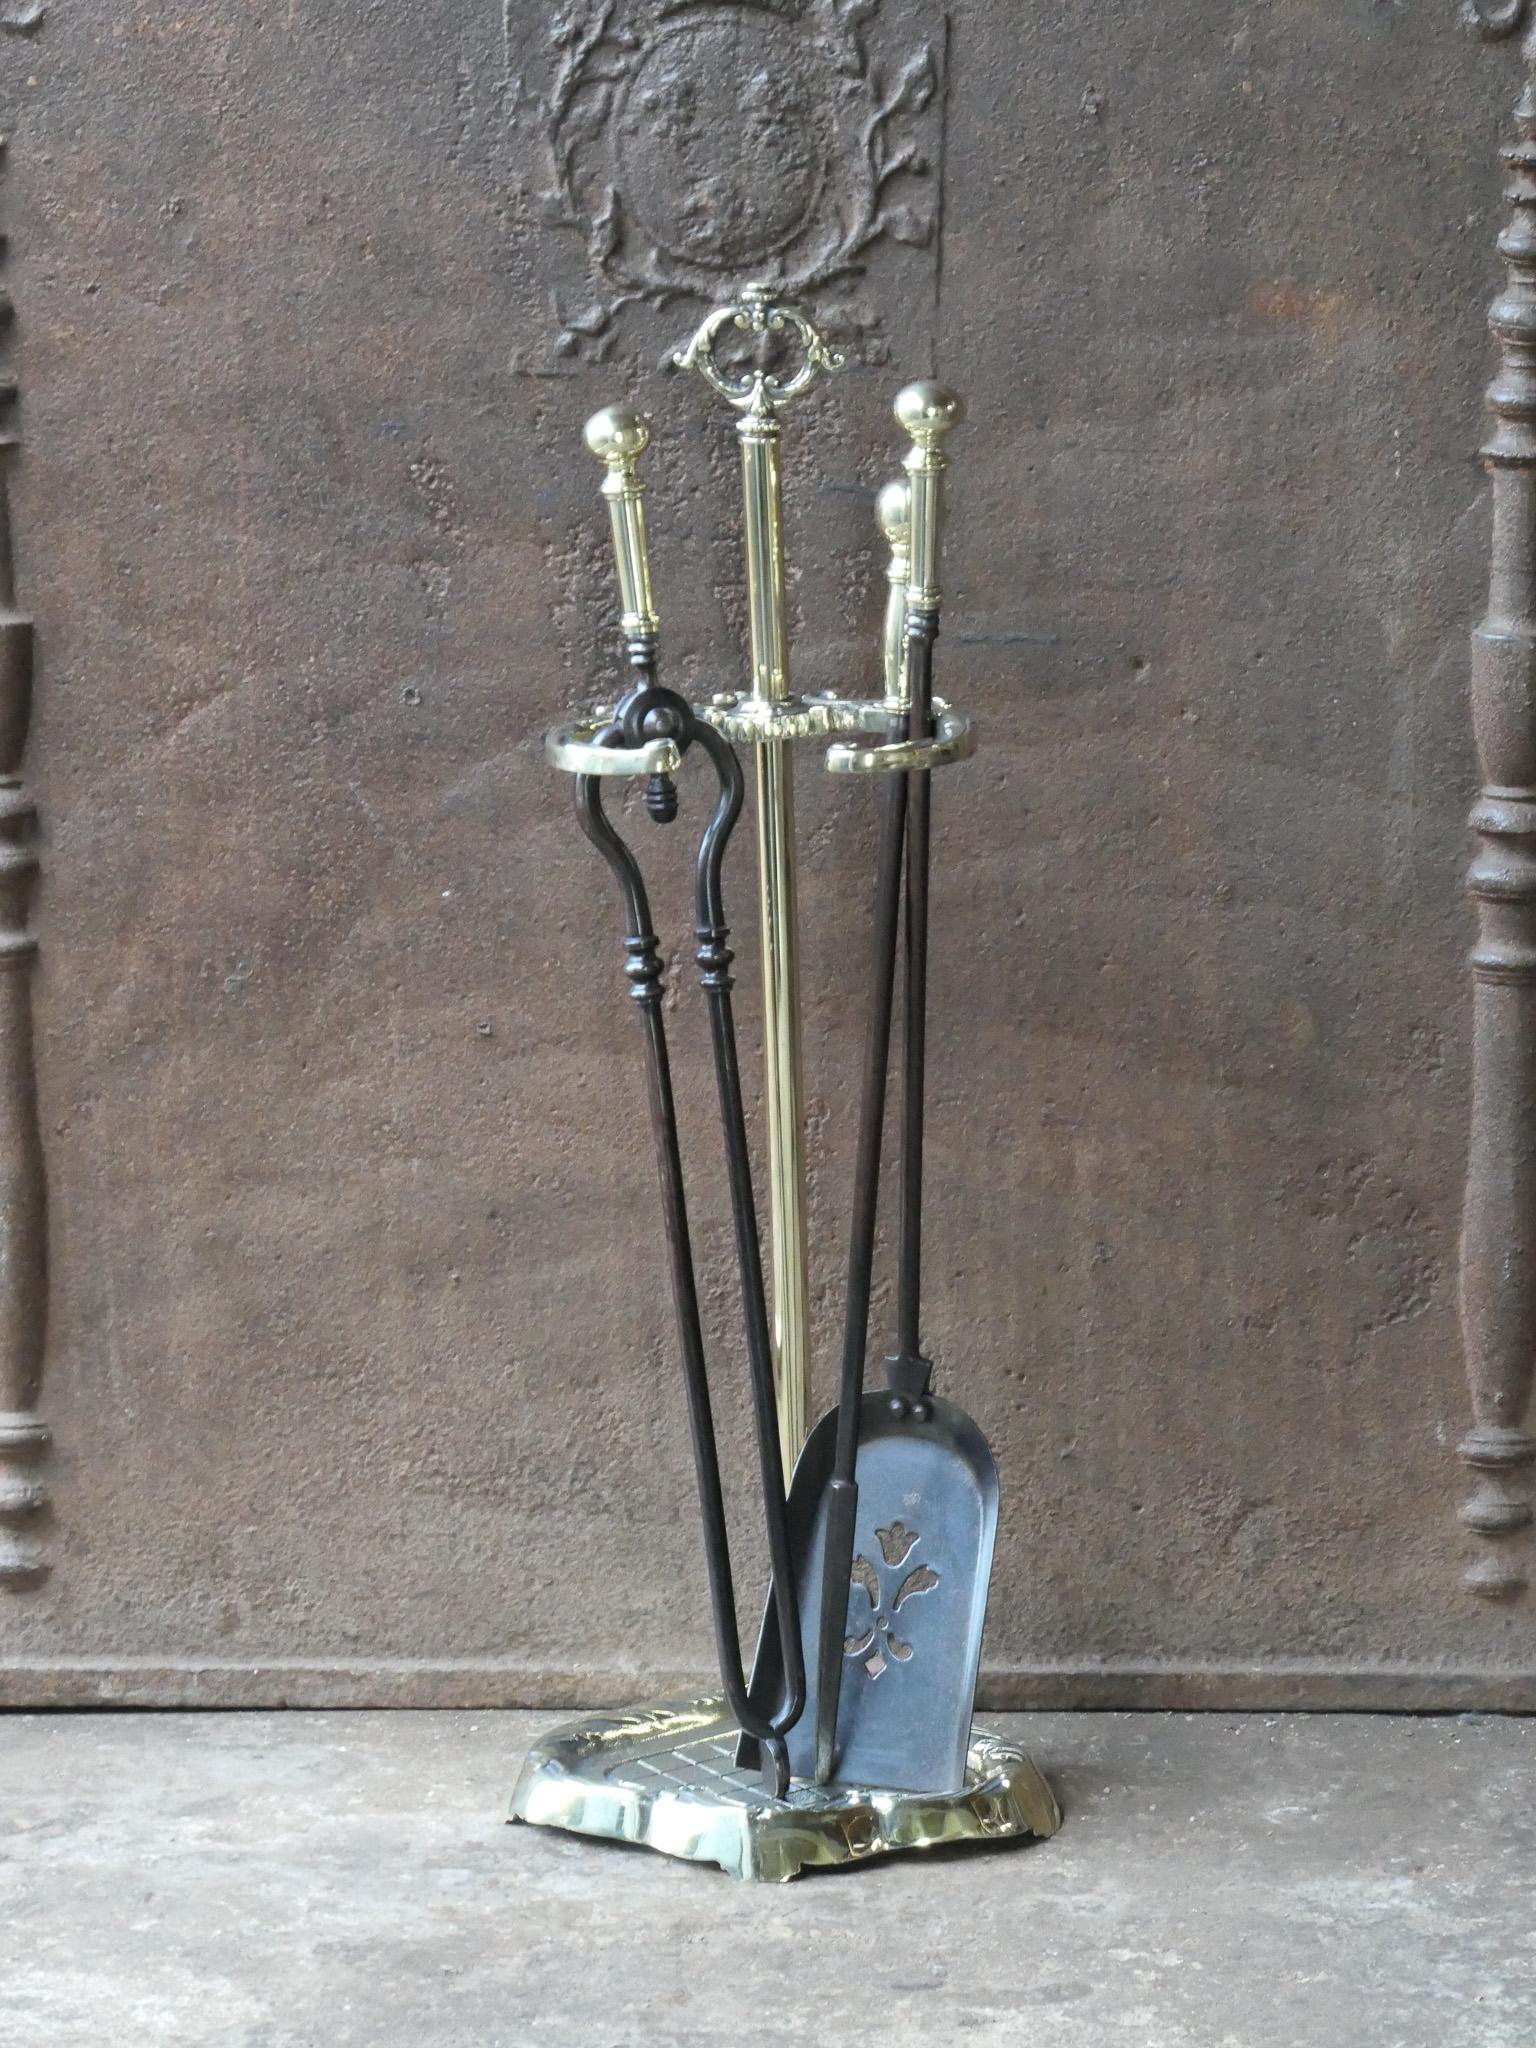 Early 20th century English Victorian period fireplace toolset. The tools are made of wrought iron and polished brass and the stand of polished brass. The toolset consists of tongs, shovel, poker and stand. The condition is good.








.